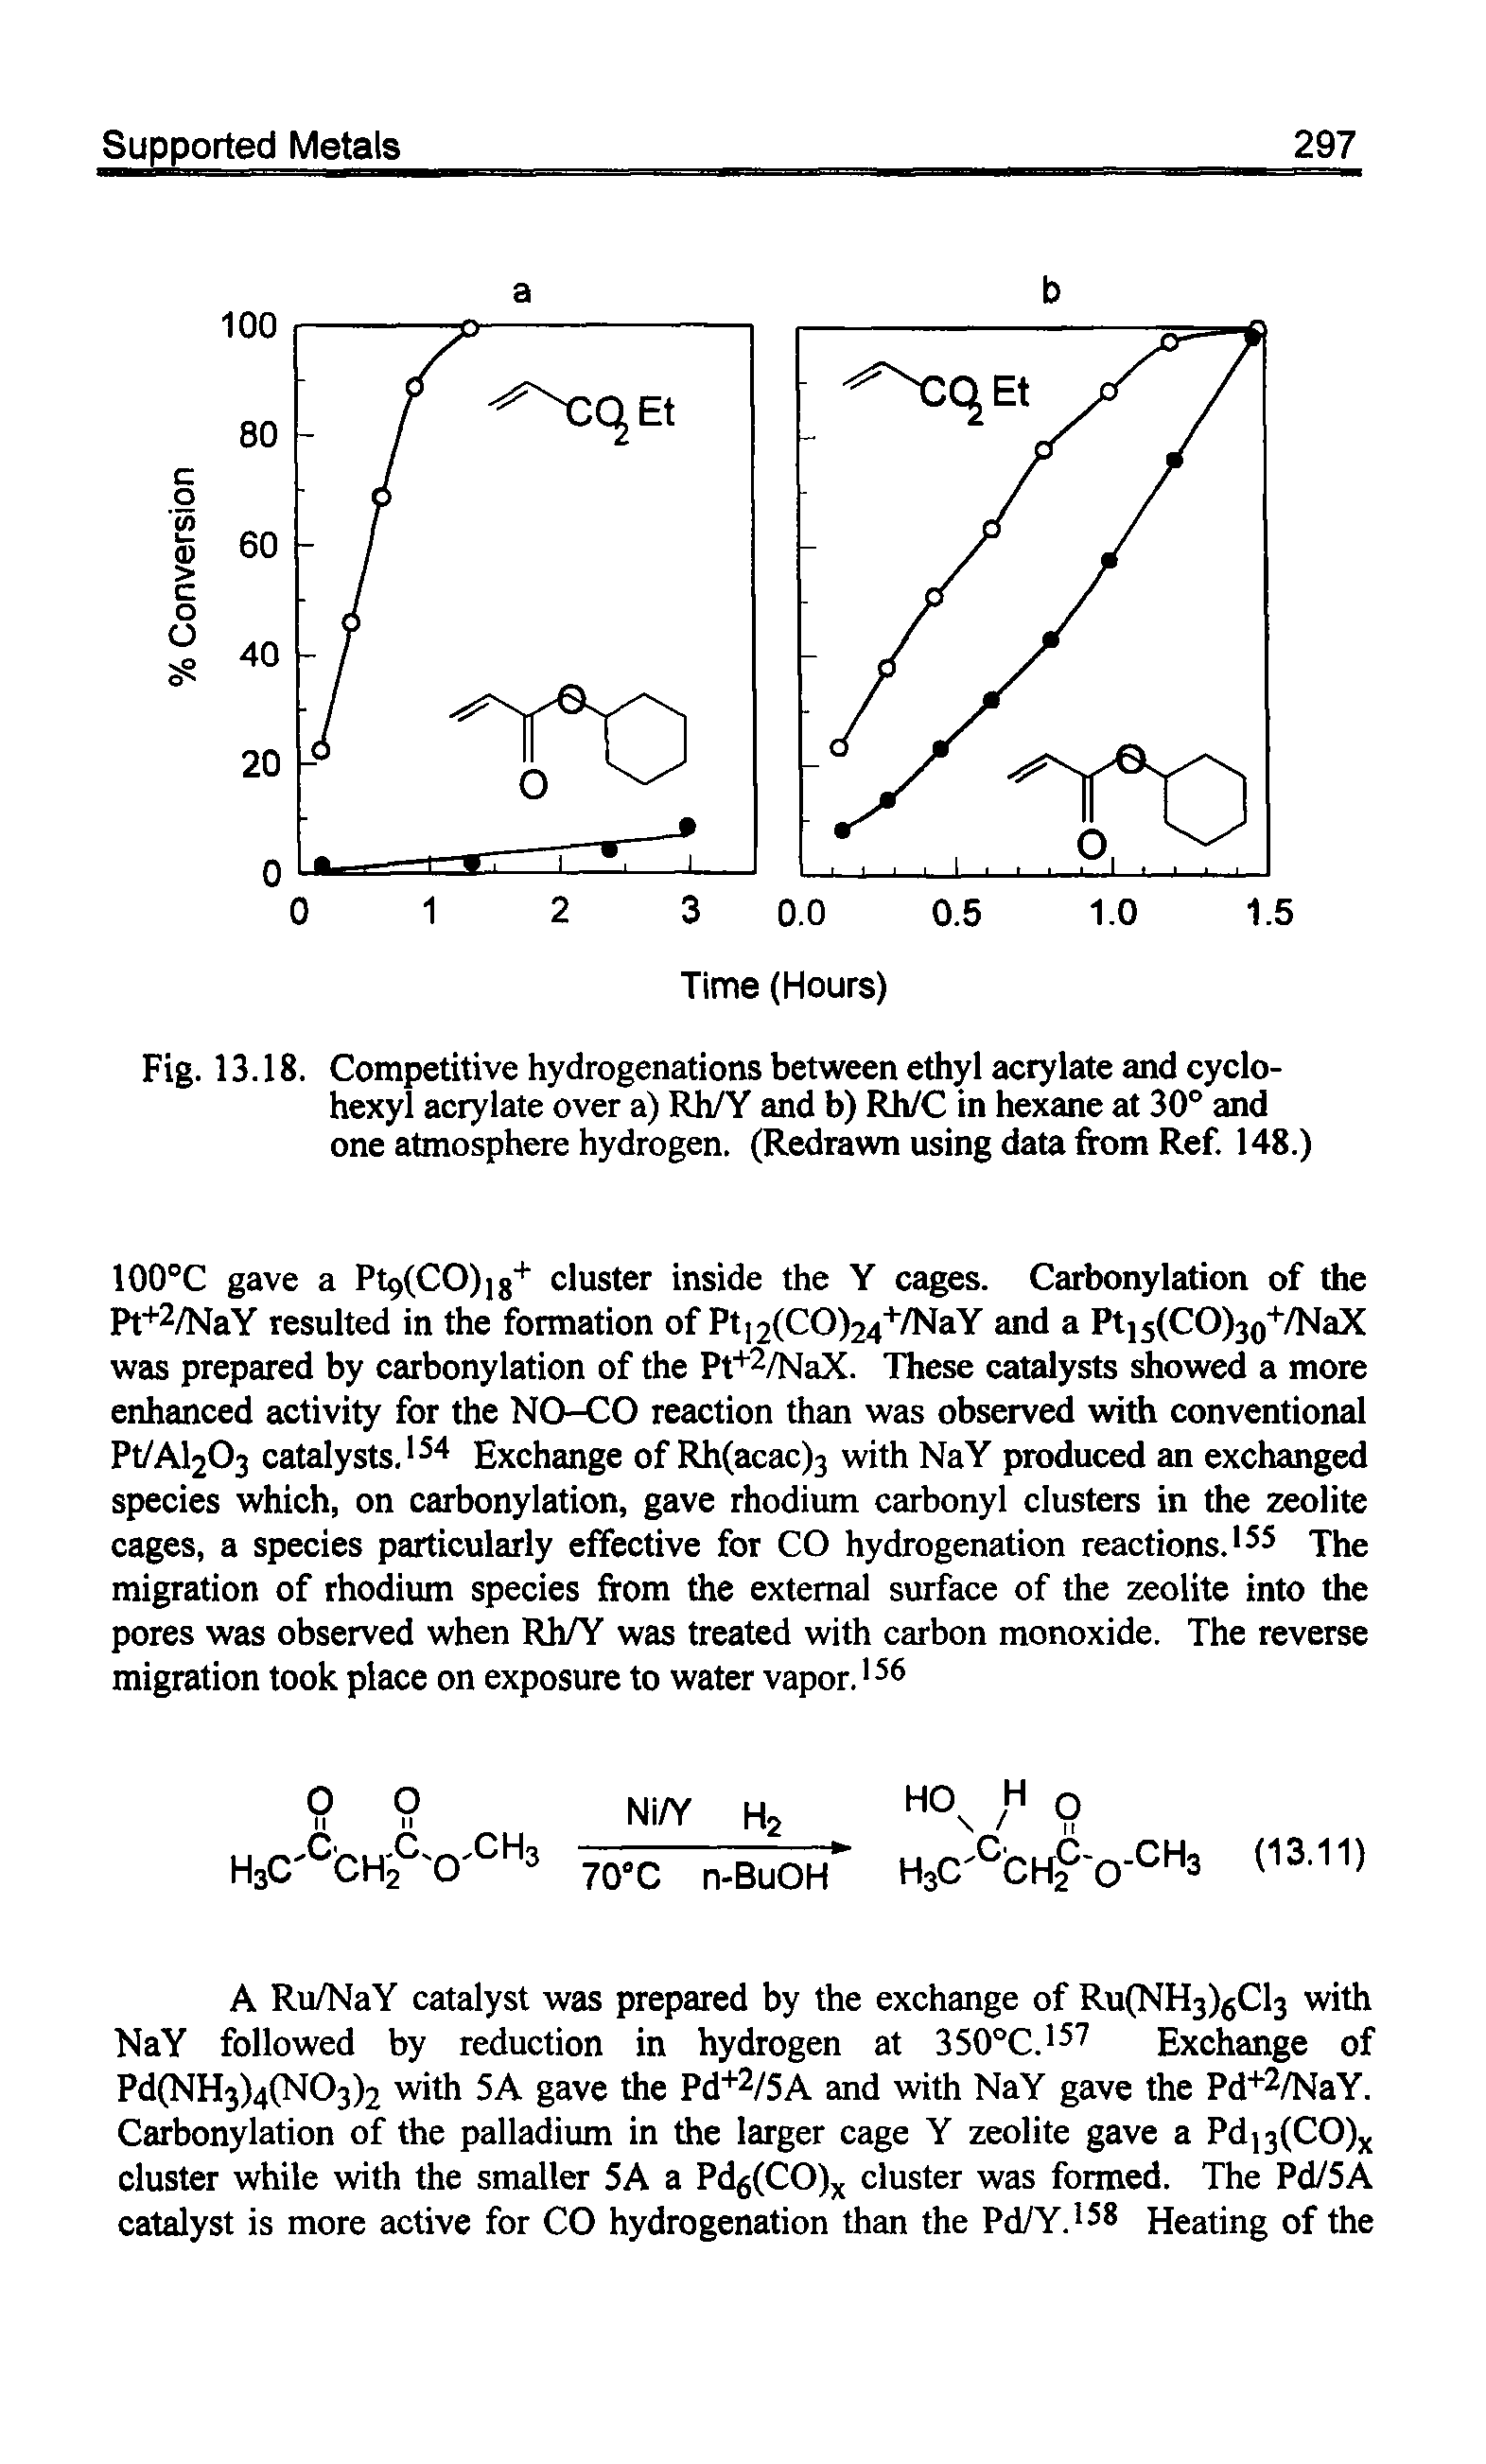 Fig. 13.18. Competitive hydrogenations between ethyl acrylate and cyclohexyl acrylate over a) Rh/Y and b) Rh/C in hexane at 30° and one atmosphere hydrogen. (Redrawn using data from Ref. 148.)...